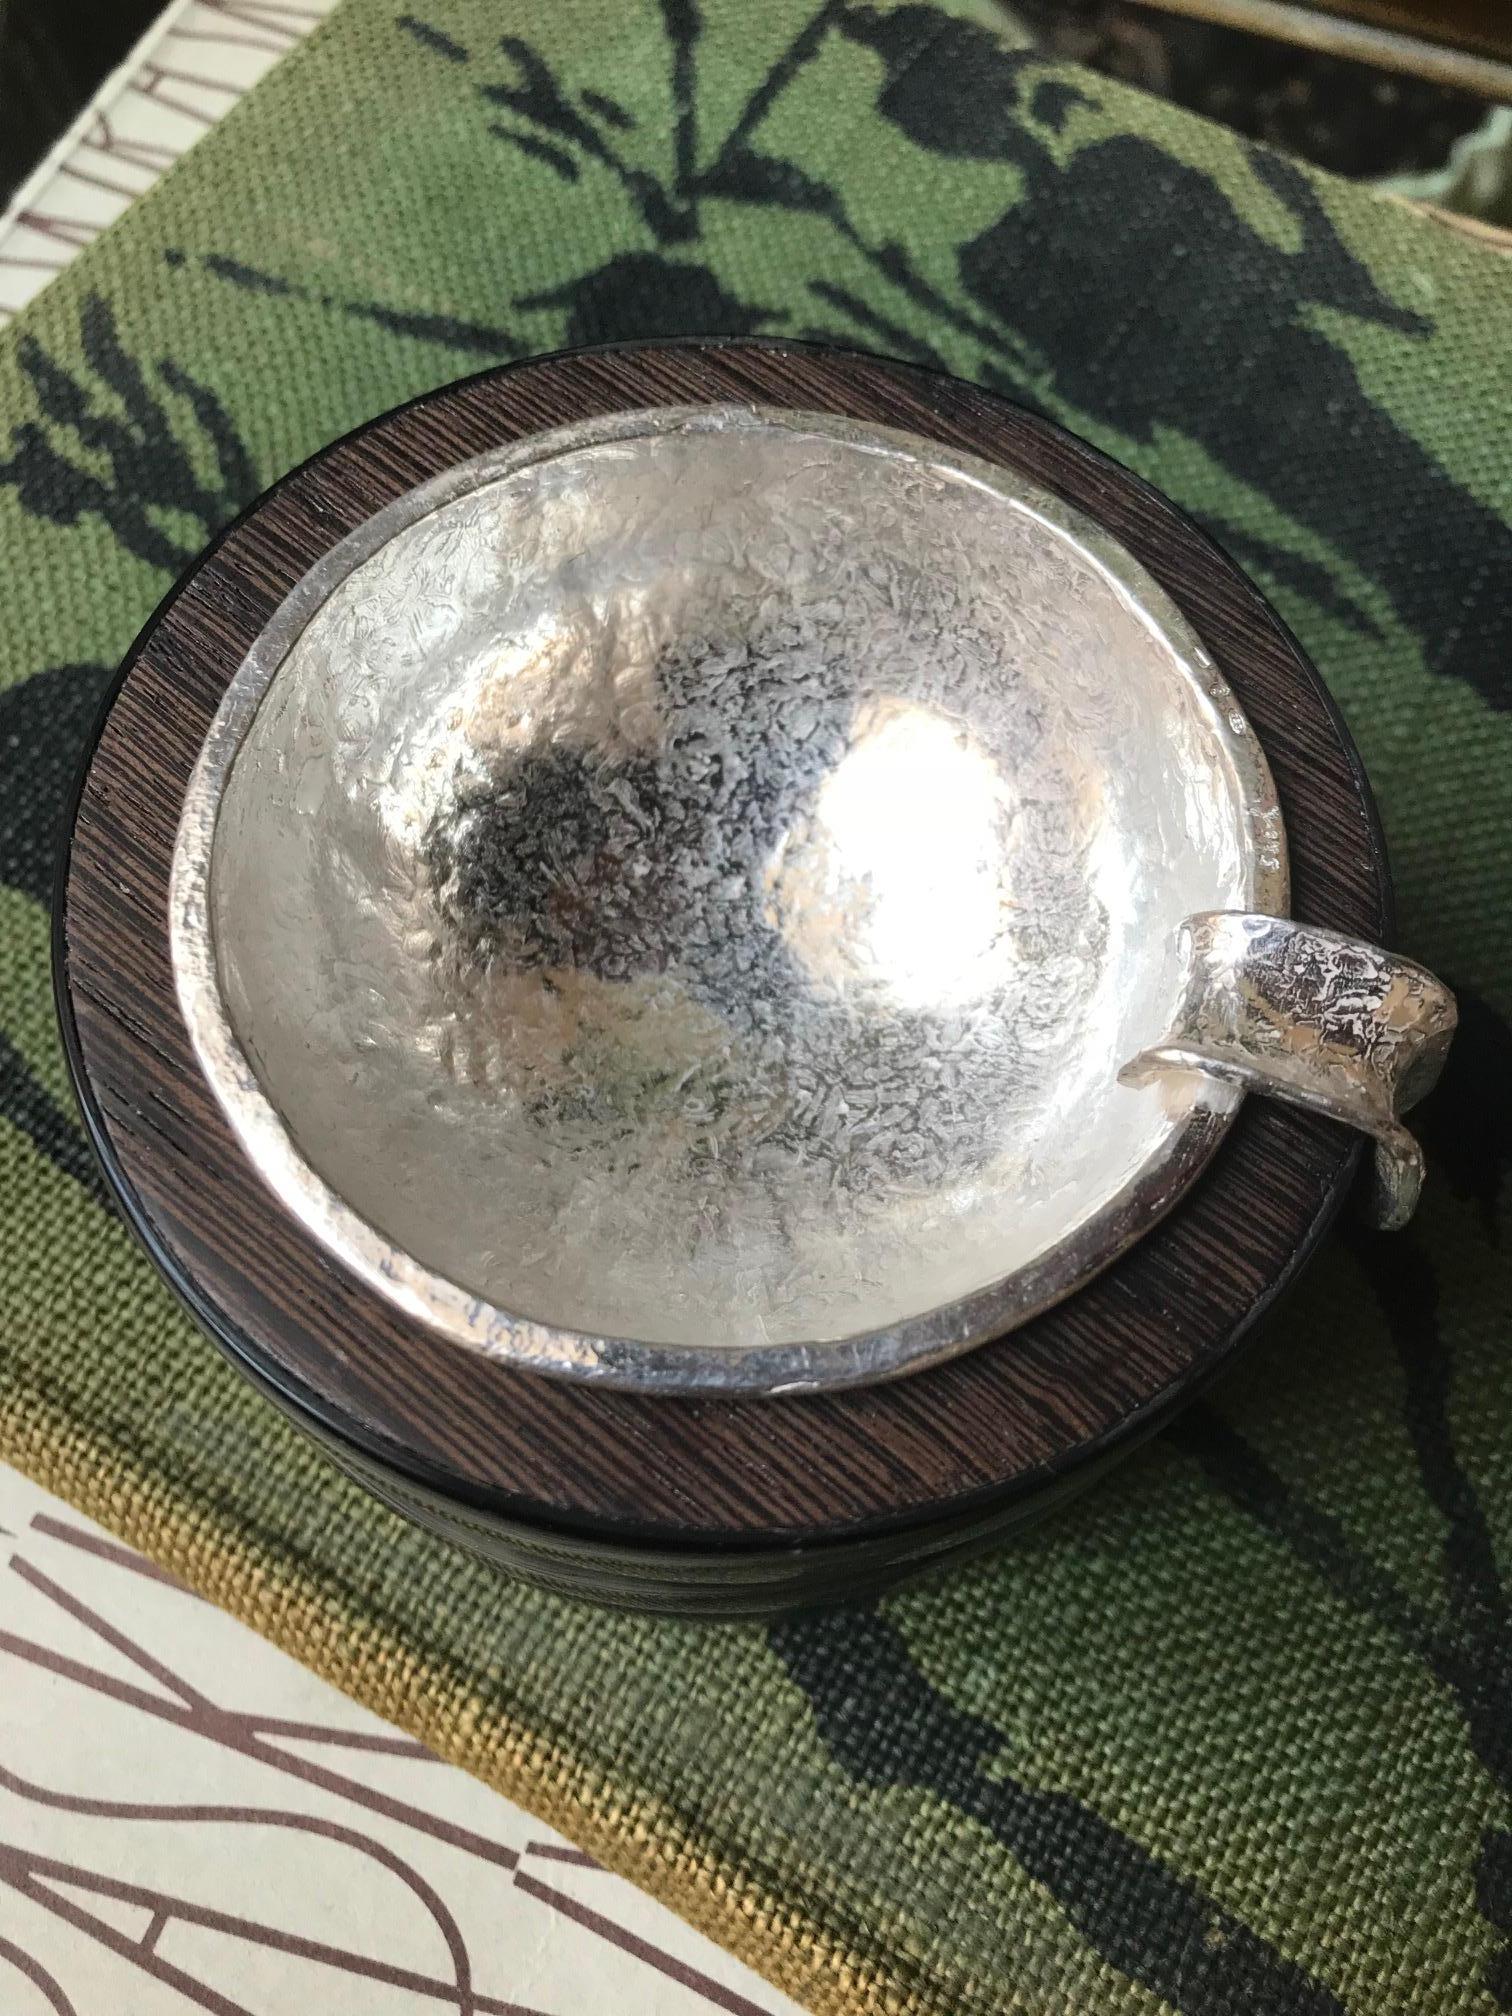 Ashtray of solid silver handmade in Italy by master craftsmen in Rome.
The removable hand hammered ashtray is set within African Wenge wood and cow horn.
Natural materials are crafted by highly skilled artisans in Africa & England. 
Silver total of